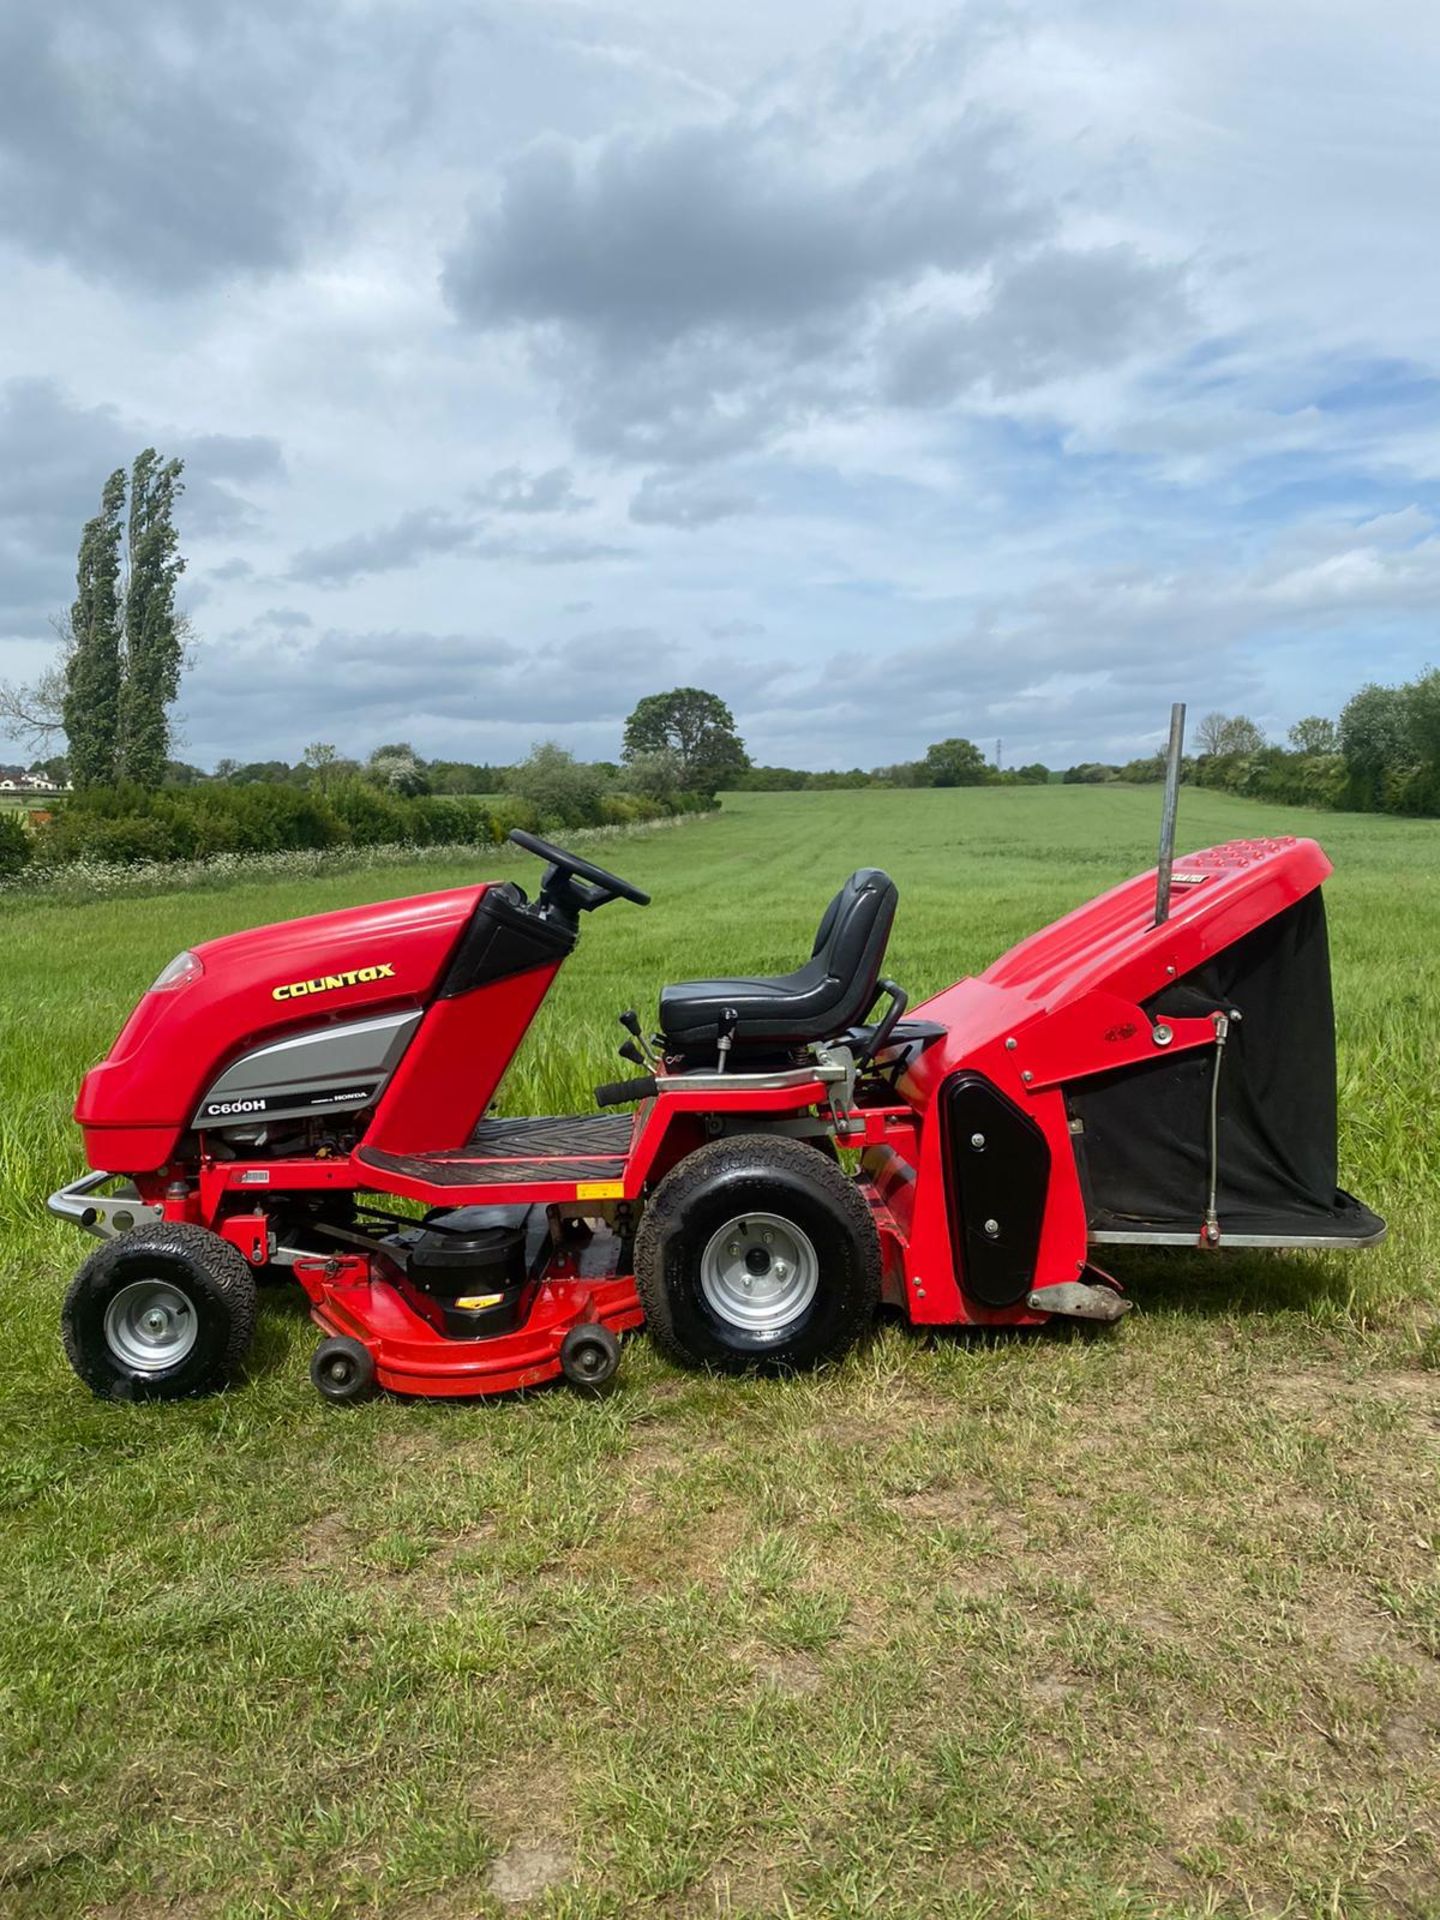 COUNTAX C600H ride on lawn mower, 42 inch cutting deck *PLUS VAT* - Image 6 of 8